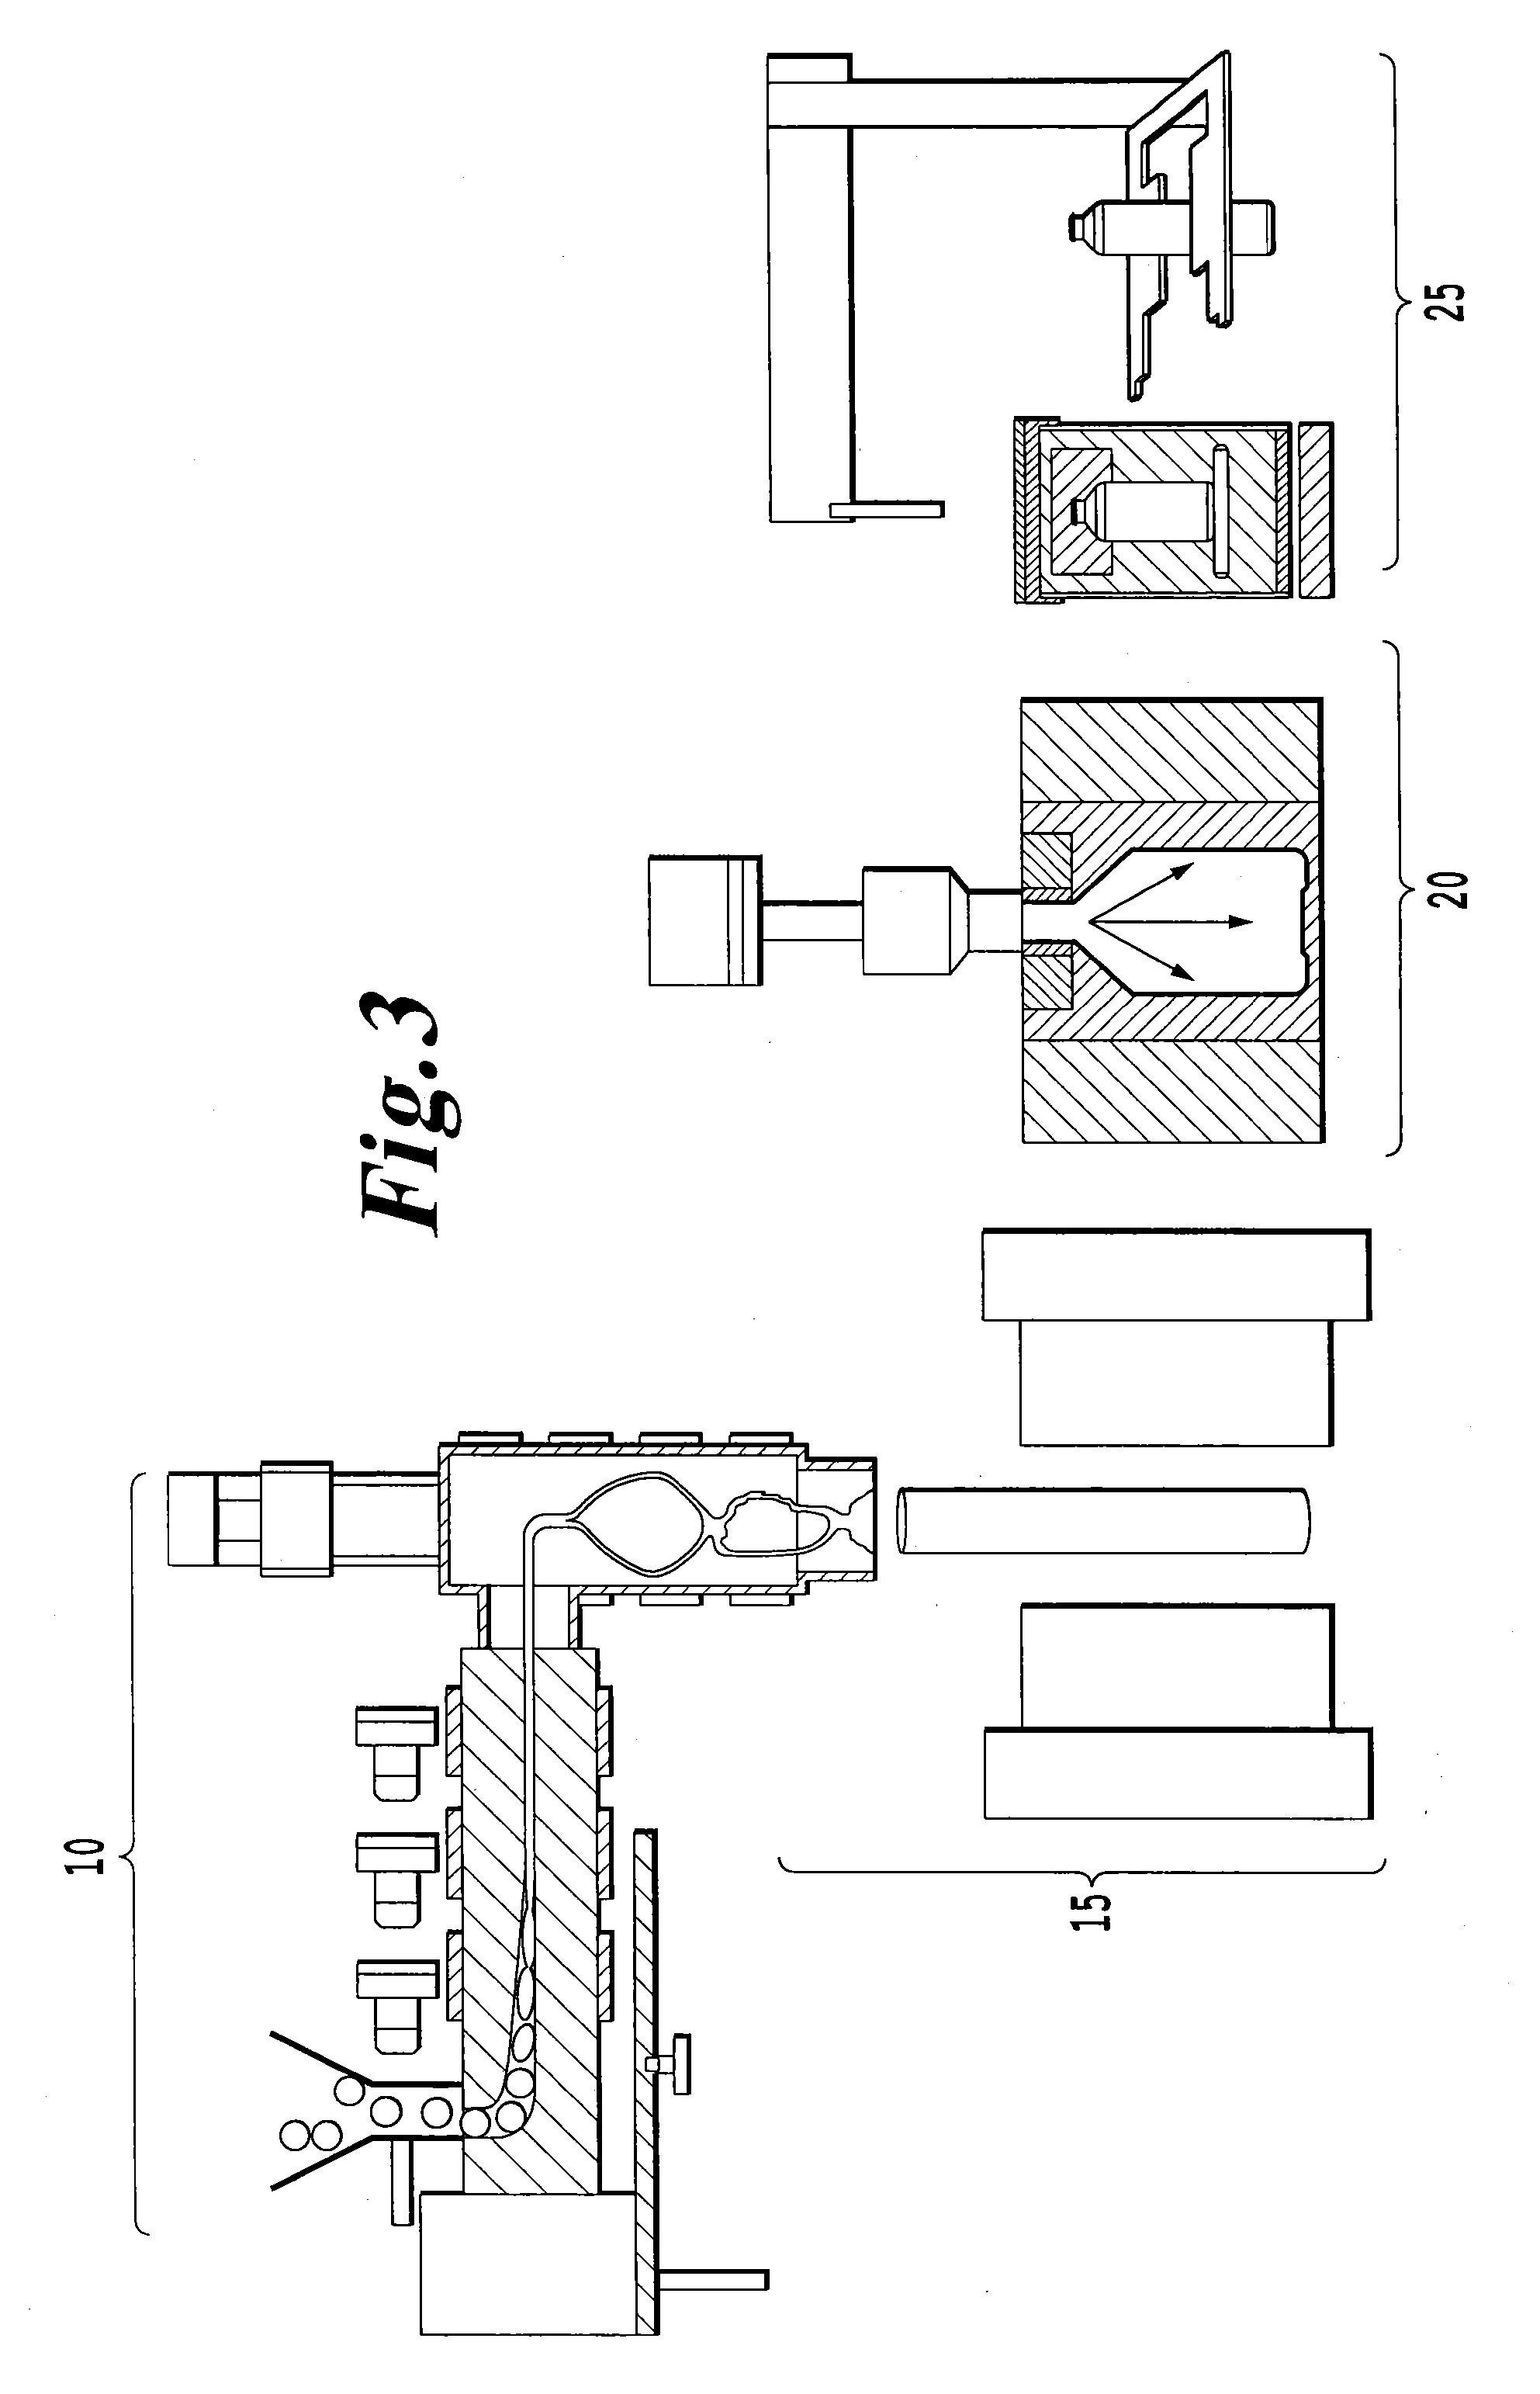 Ultra-high iv polyester for extrusion blow molding and method for its production